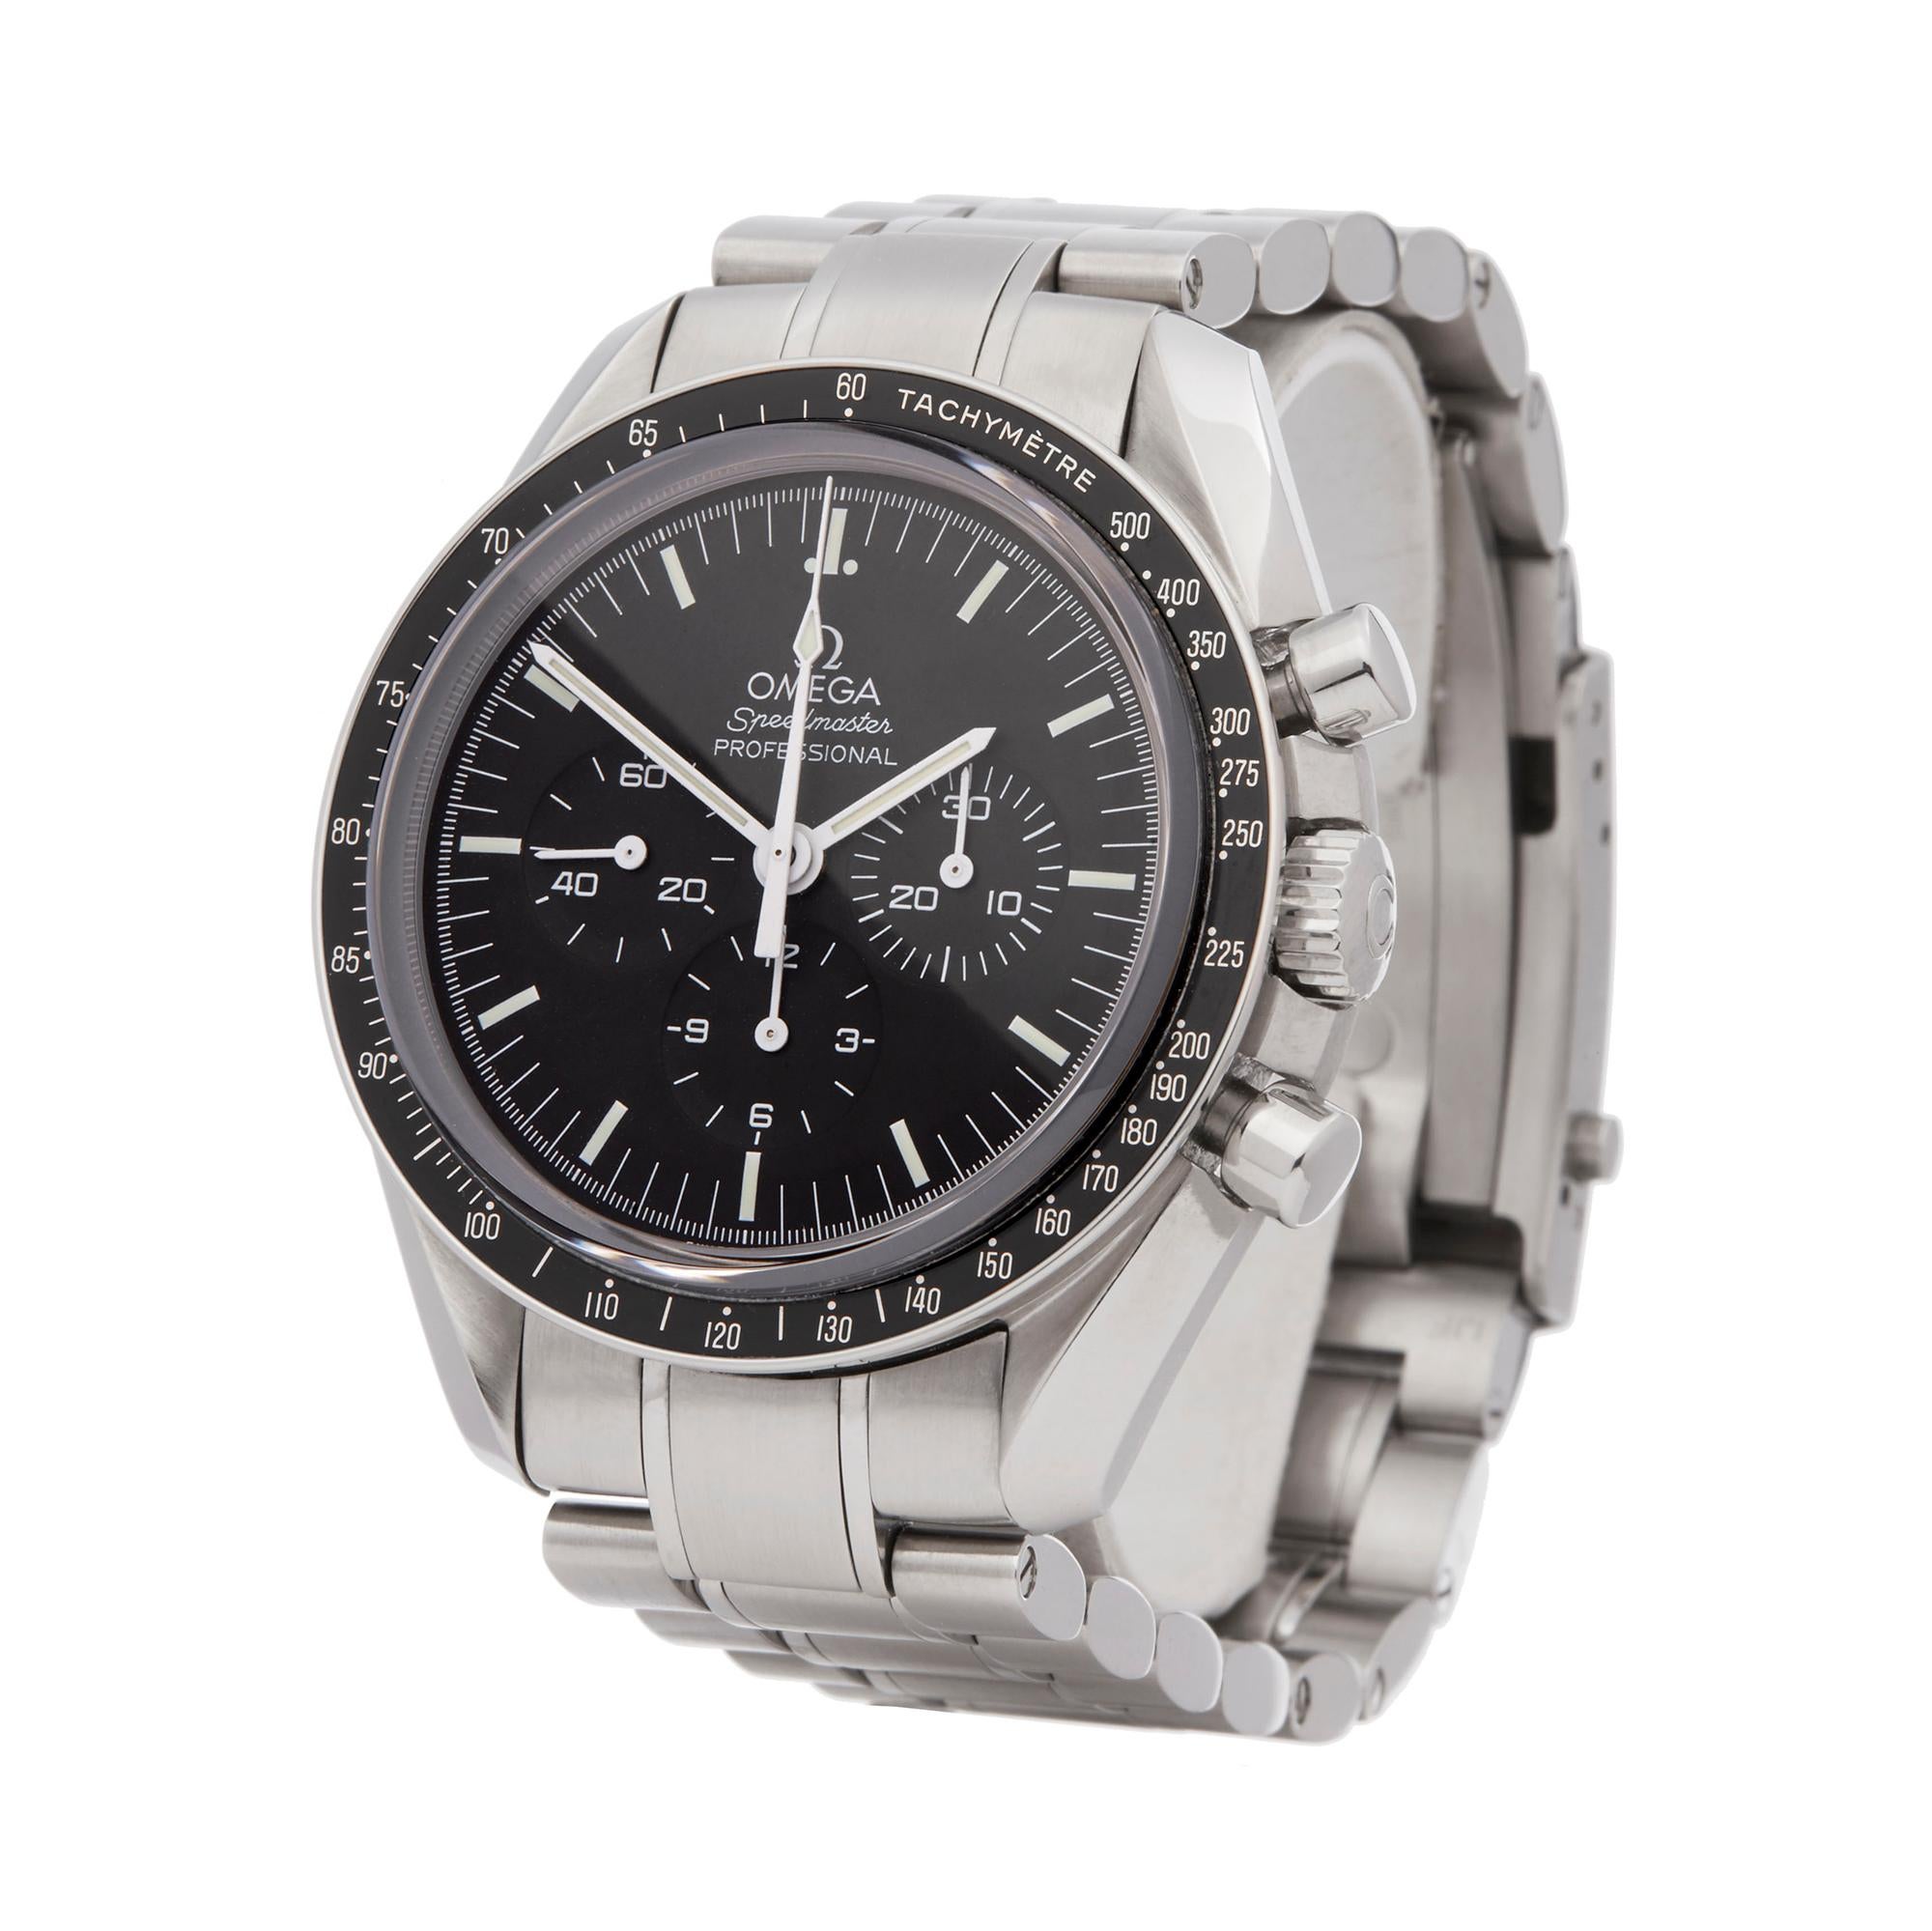 Ref: COM2180
Manufacturer: Omega
Model: Speedmaster
Model Ref: 311.30.42.30.01.006
Age: 16th July 2016
Gender: Mens
Complete With: Box, Manuals, Guarantee, Booklets, Straps, Tools, Loupe & Medallion
Dial: Black Baton
Glass: Sapphire